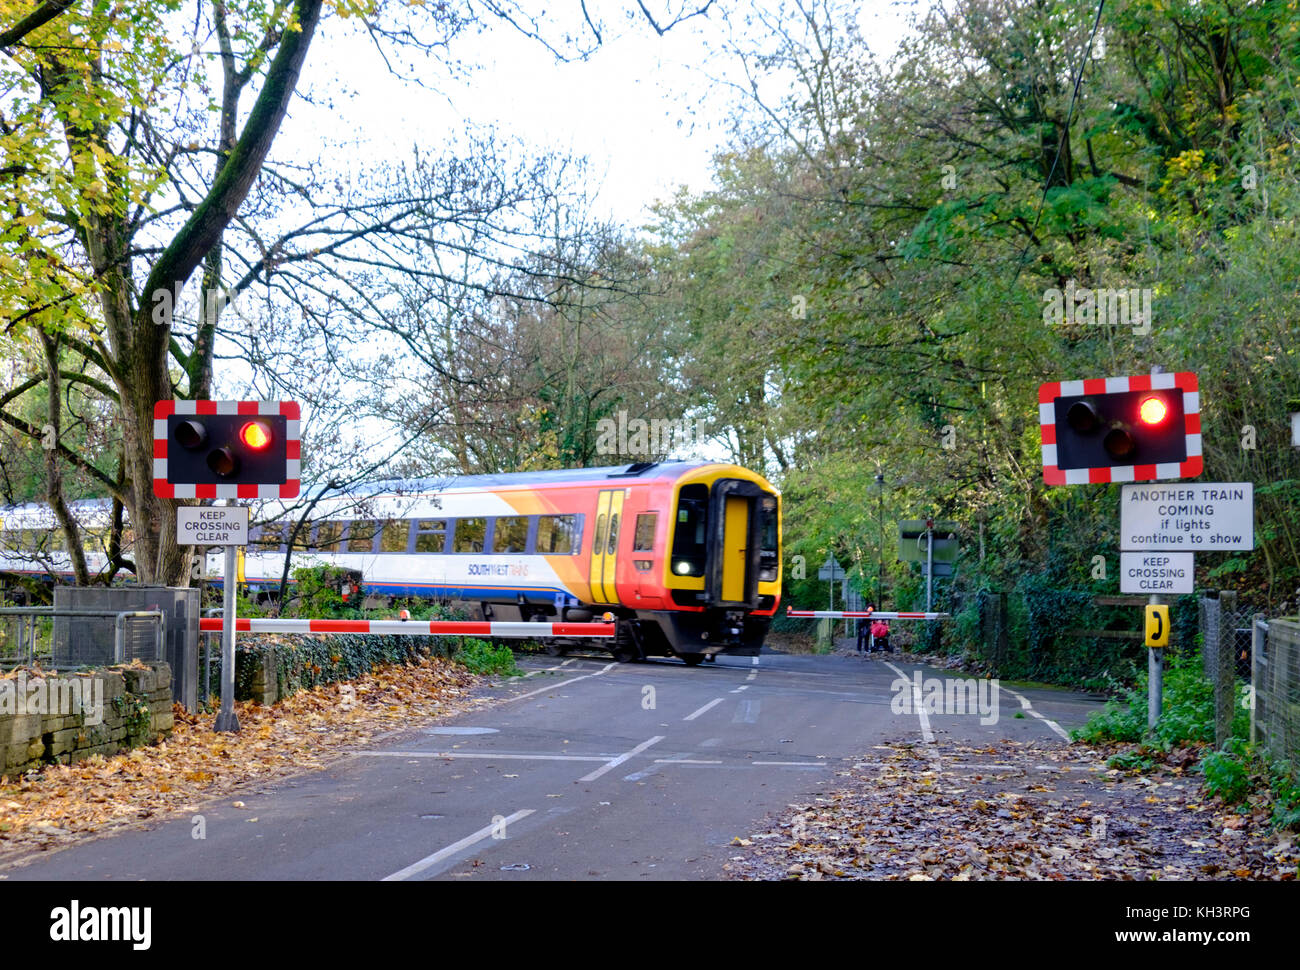 Around the small Wiltshire town of Bradford-on-Avon, wiltshire,England UK Train and level crossing Stock Photo